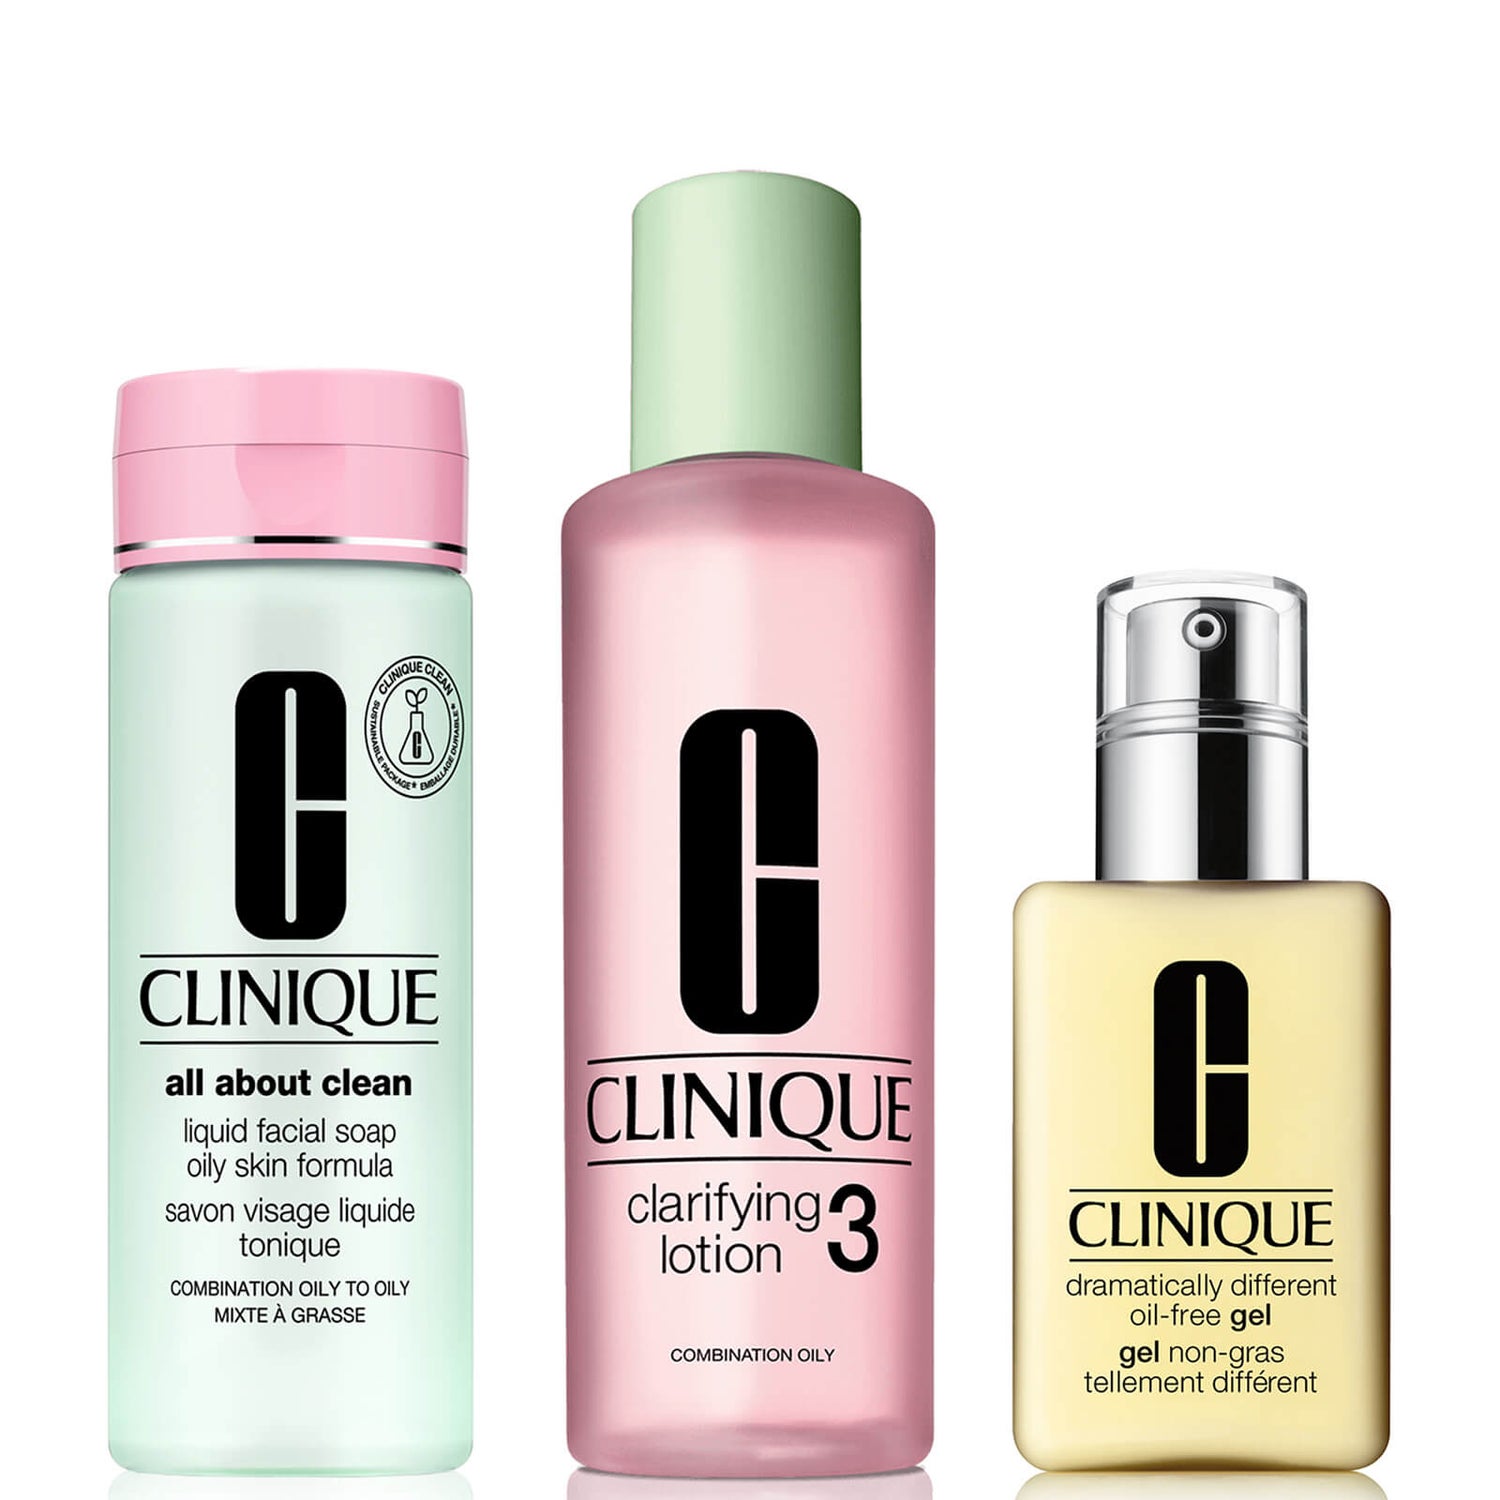 Clinique Morning Skincare Routine Bundle For Oily / Combination Skin (Worth £77.00)